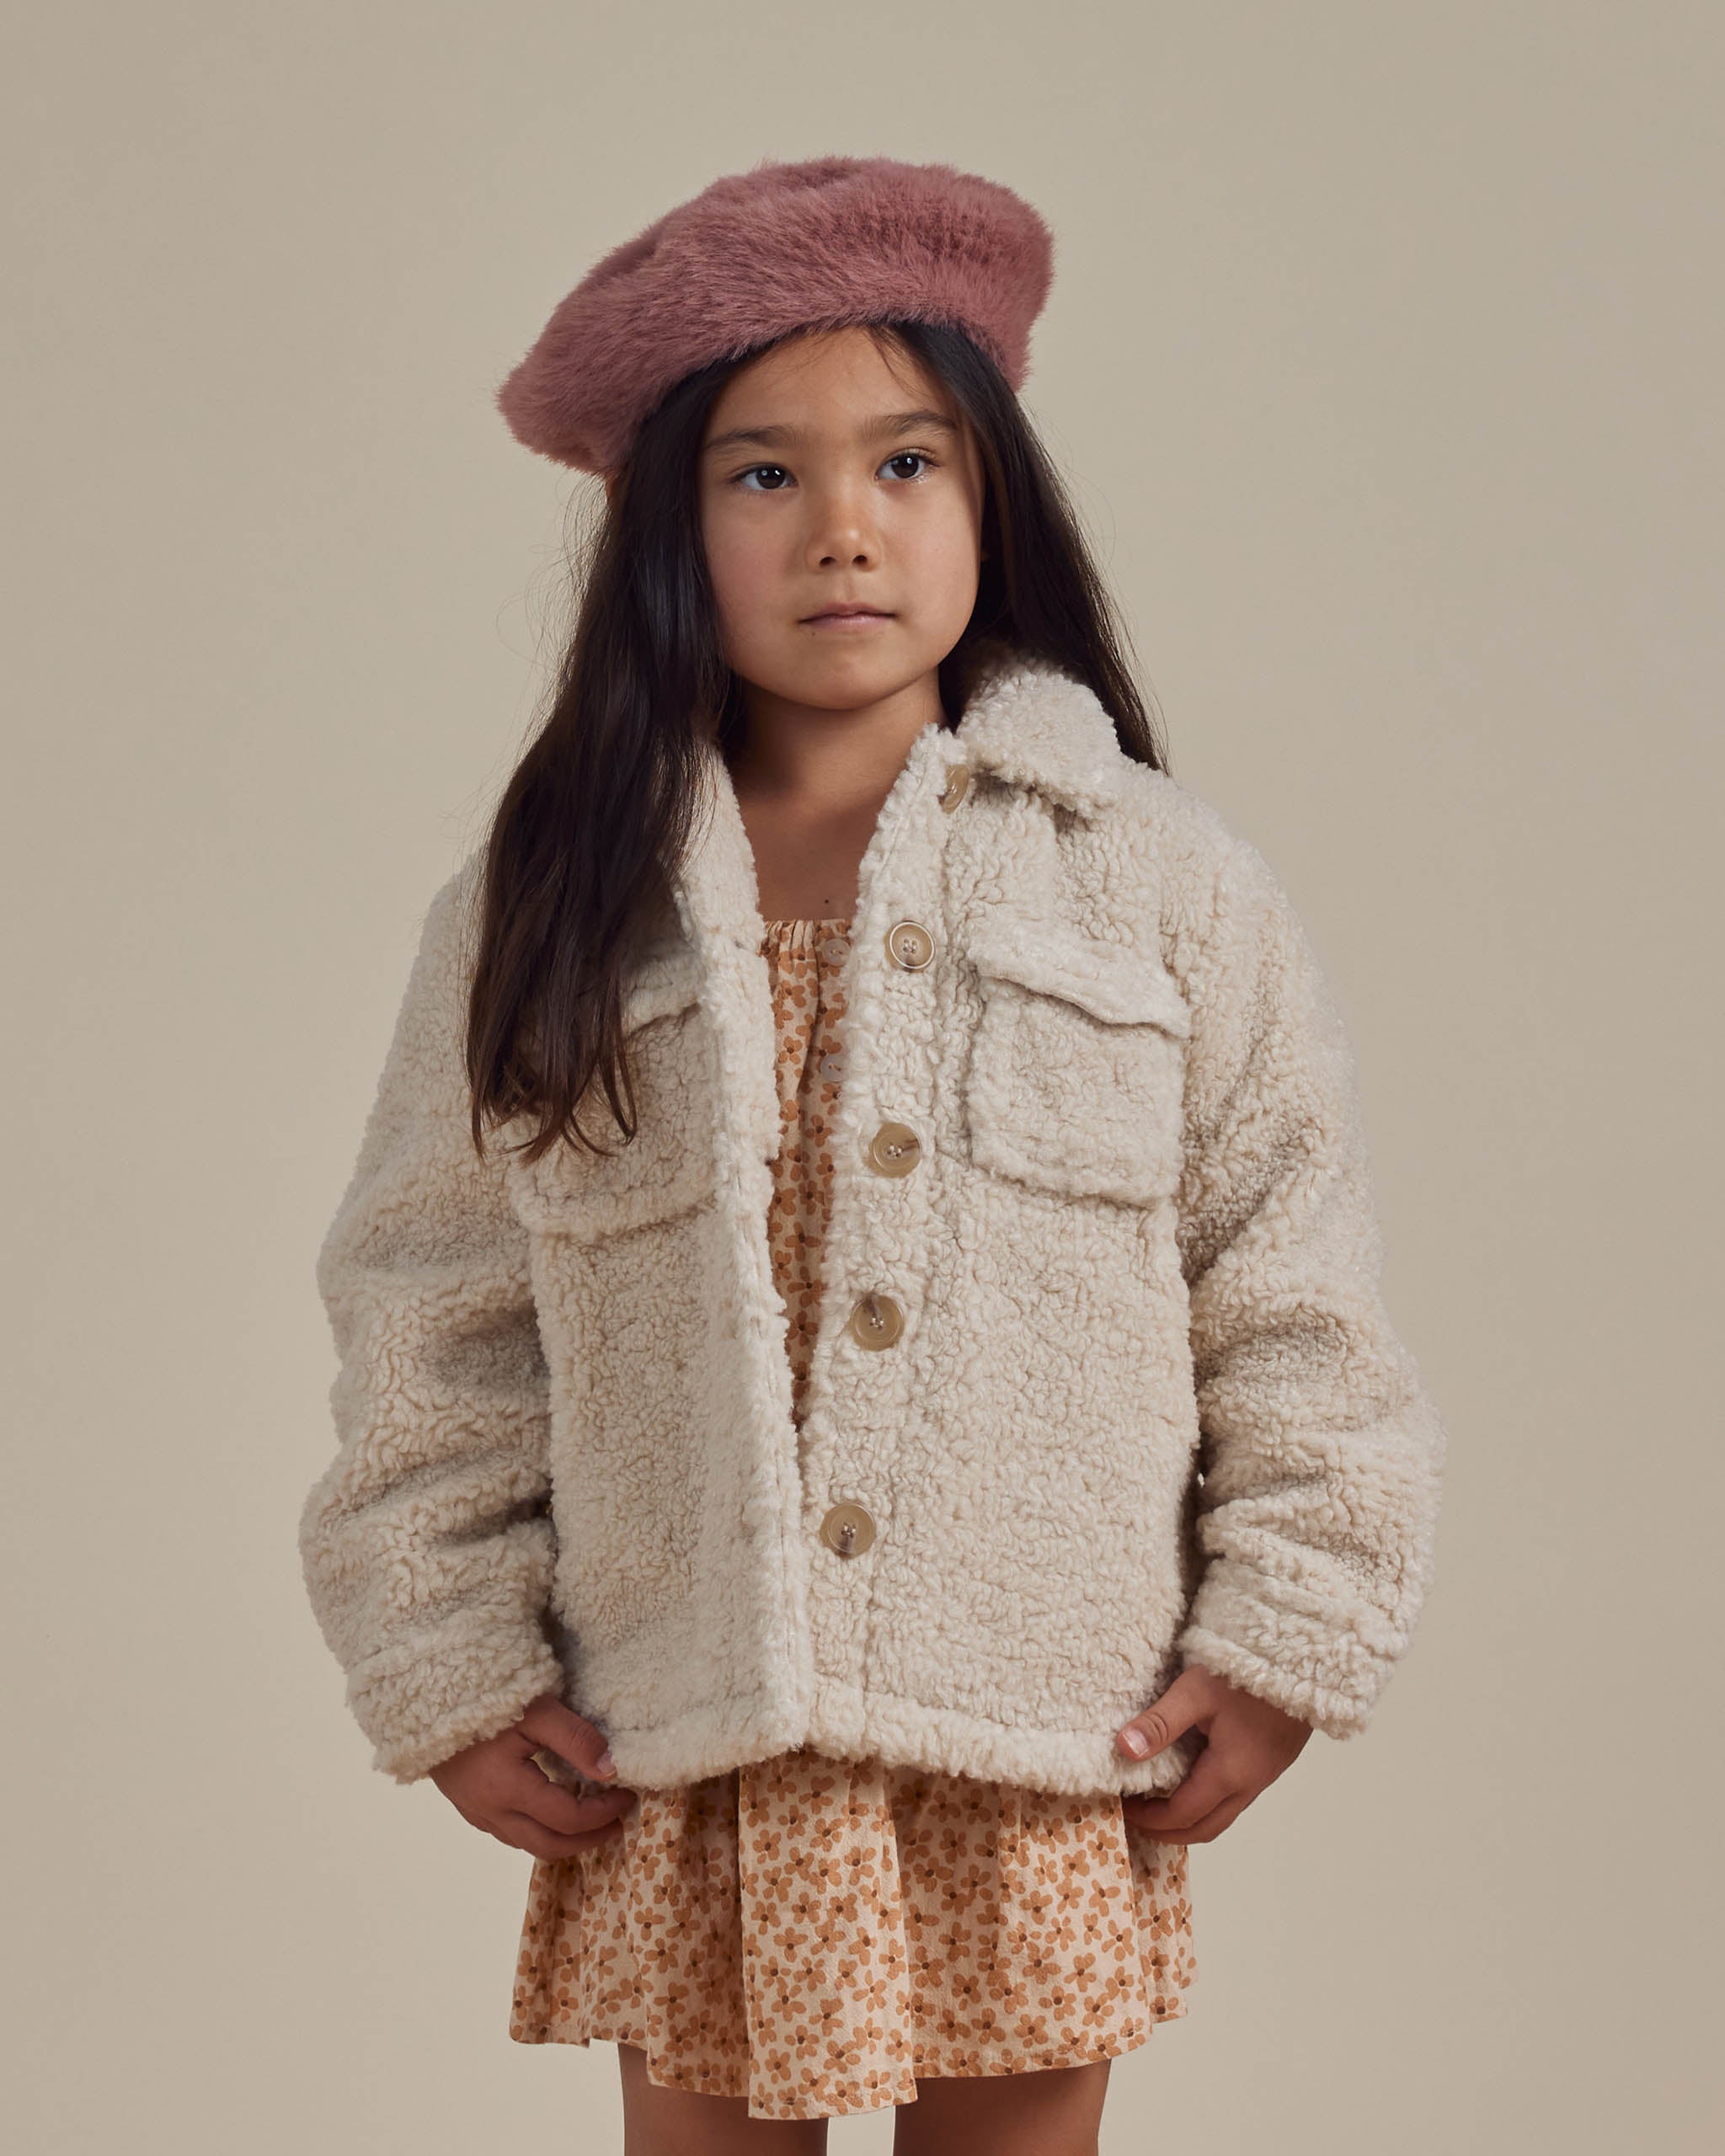 Shearling Chore Coat || Natural - Rylee + Cru | Kids Clothes | Trendy Baby Clothes | Modern Infant Outfits |